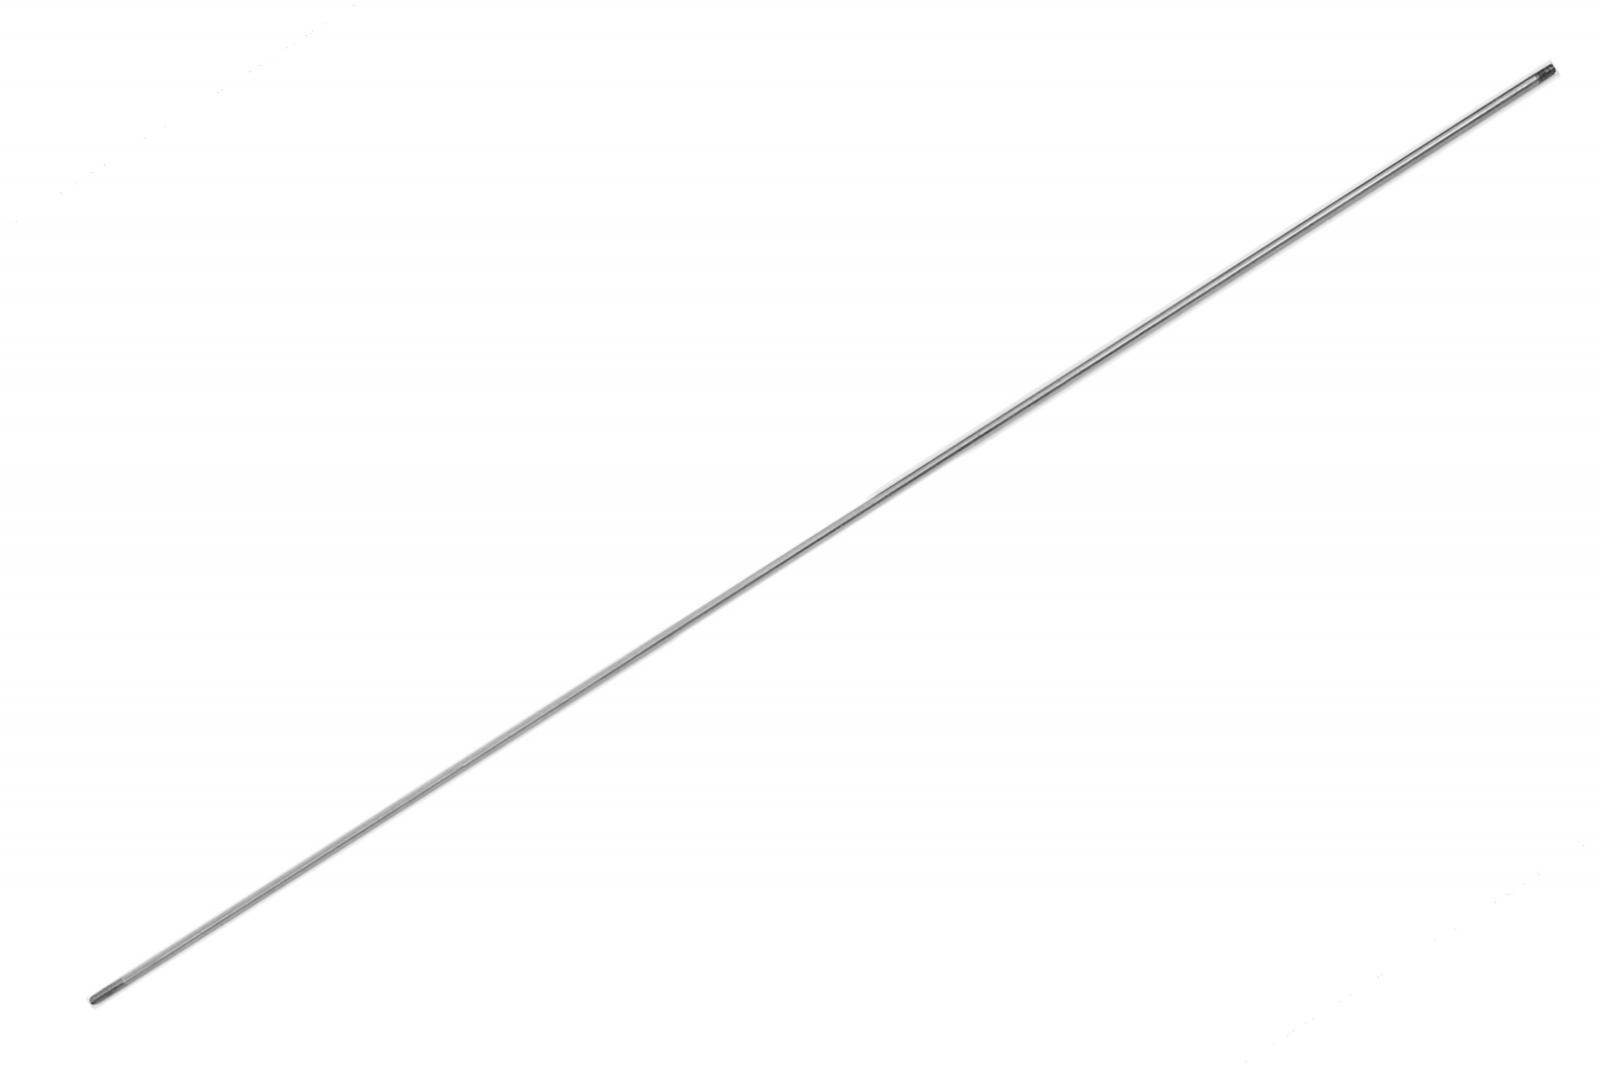 NorthStar™ Connection Rod. Part number FFH-13